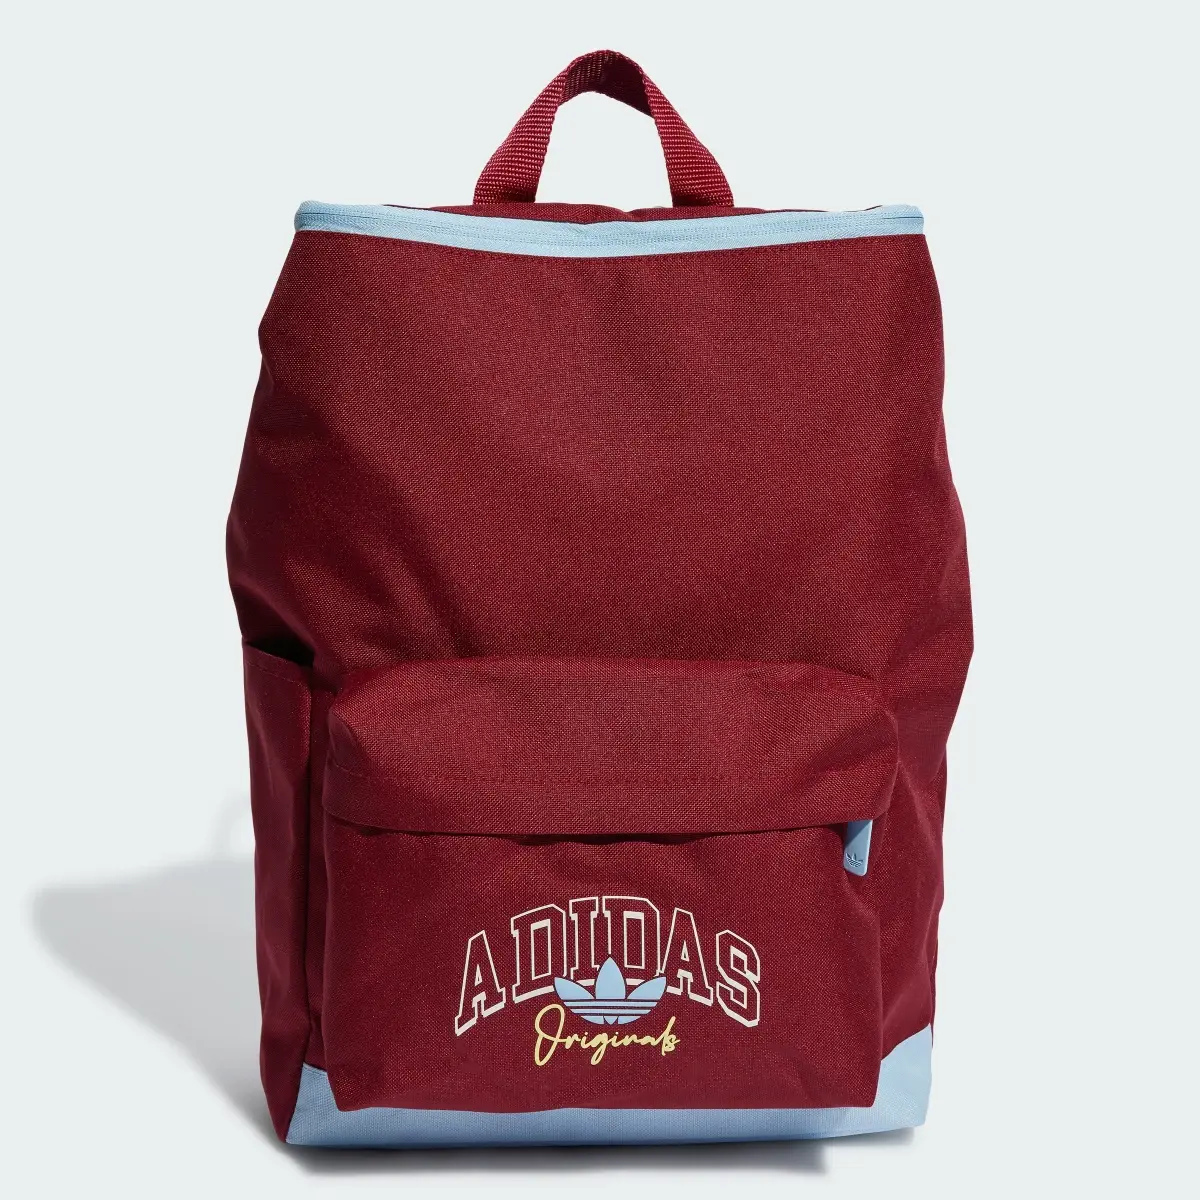 Adidas Collegiate Youth Backpack. 1